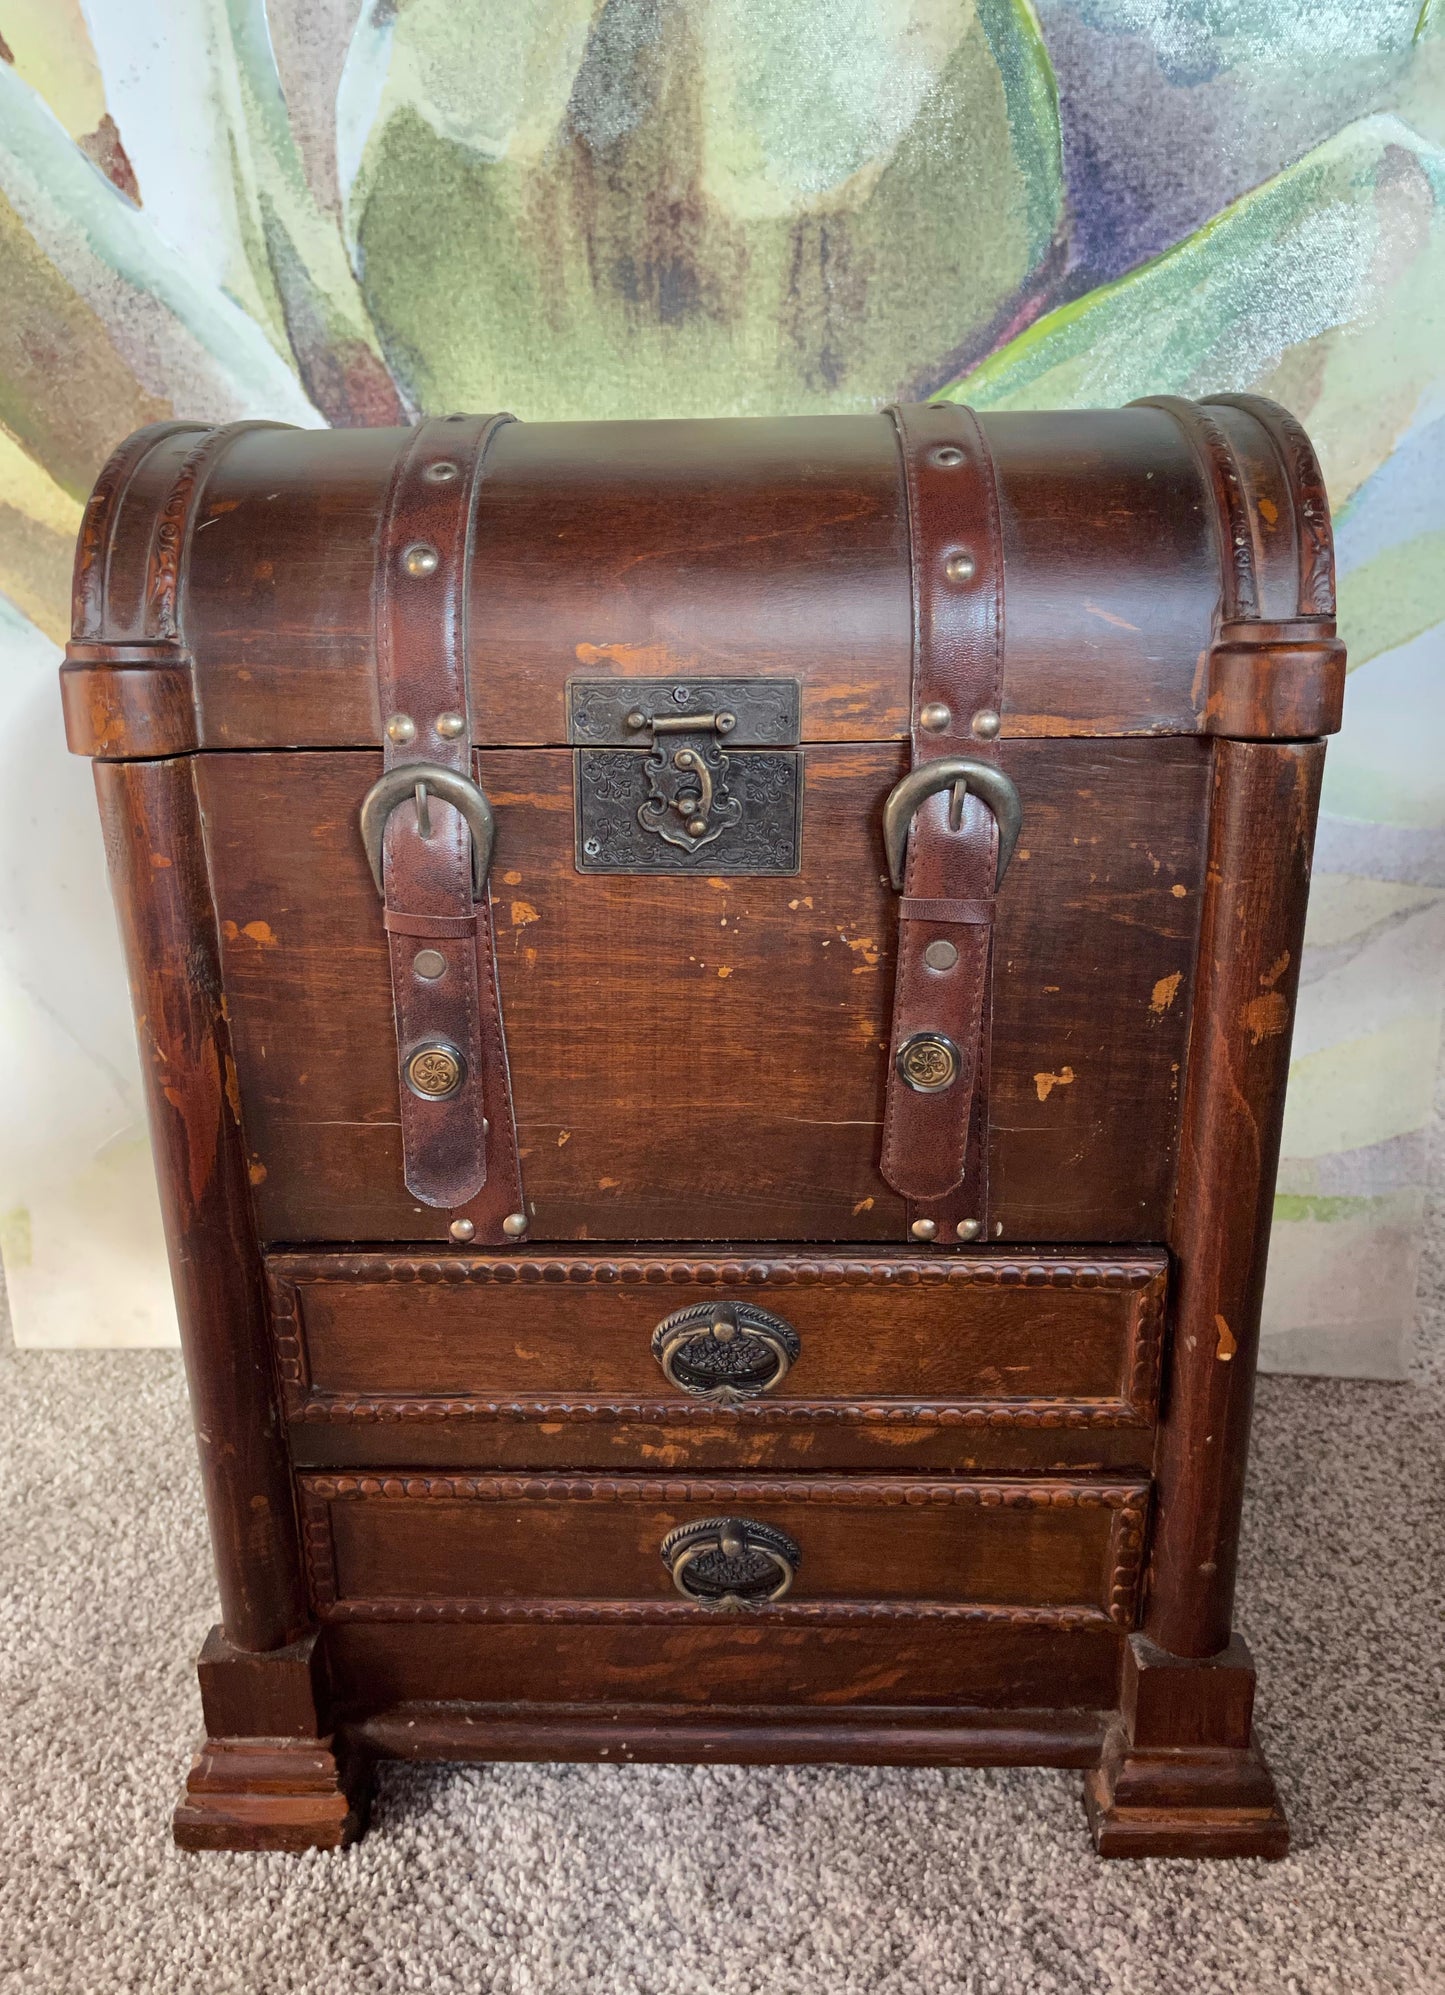 Large Vintage Trunk, Wood and Leather Vintage Chest, Home Decor